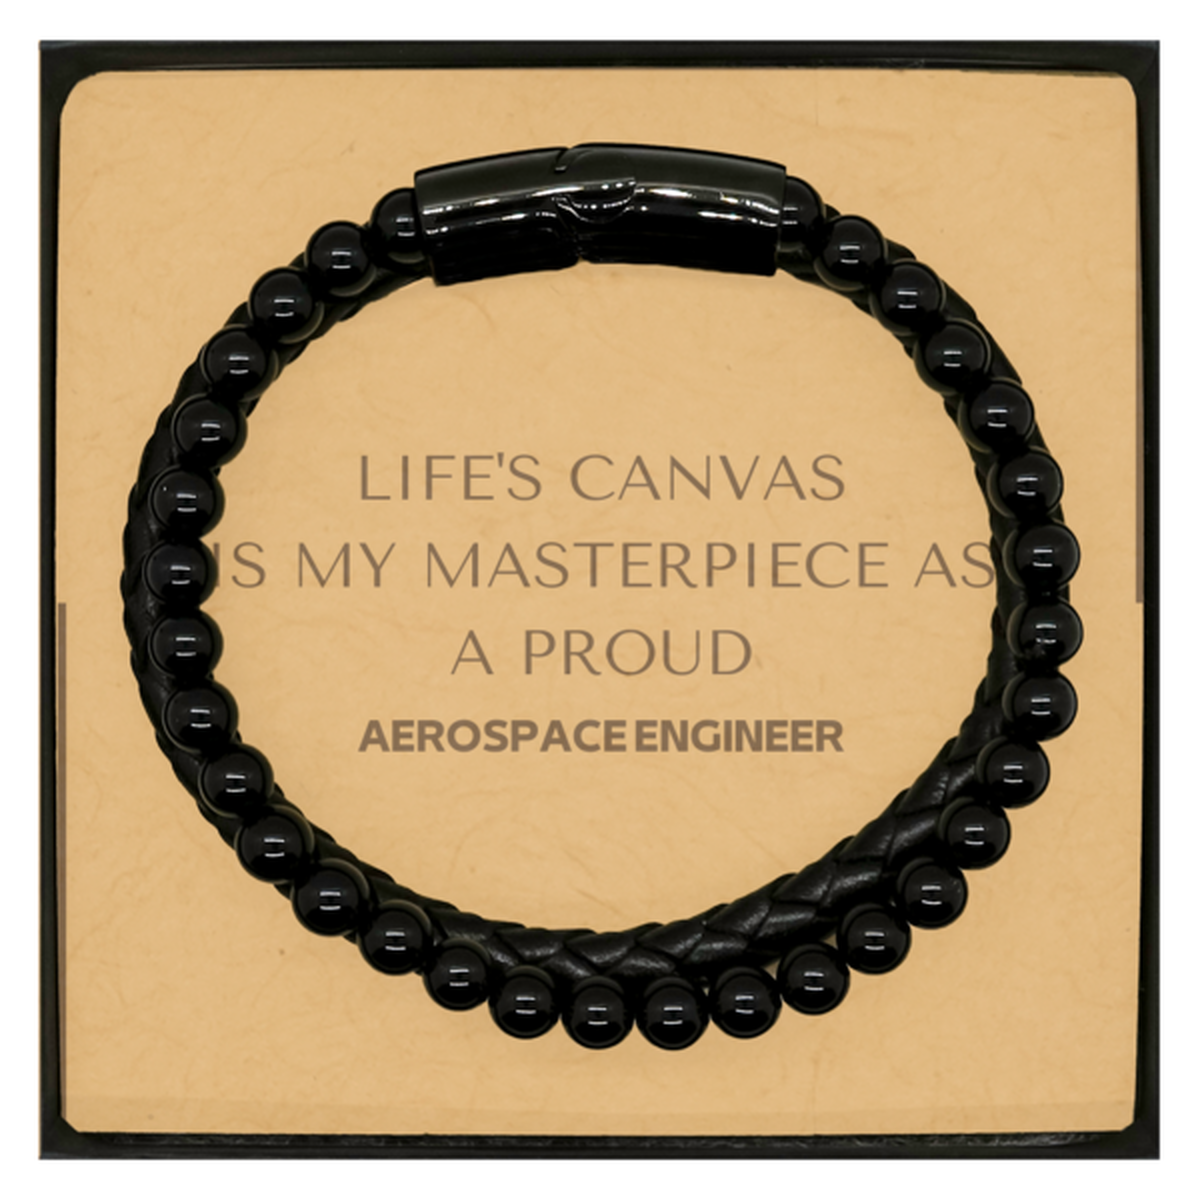 Proud Aerospace Engineer Gifts, Life's canvas is my masterpiece, Epic Birthday Christmas Unique Stone Leather Bracelets For Aerospace Engineer, Coworkers, Men, Women, Friends